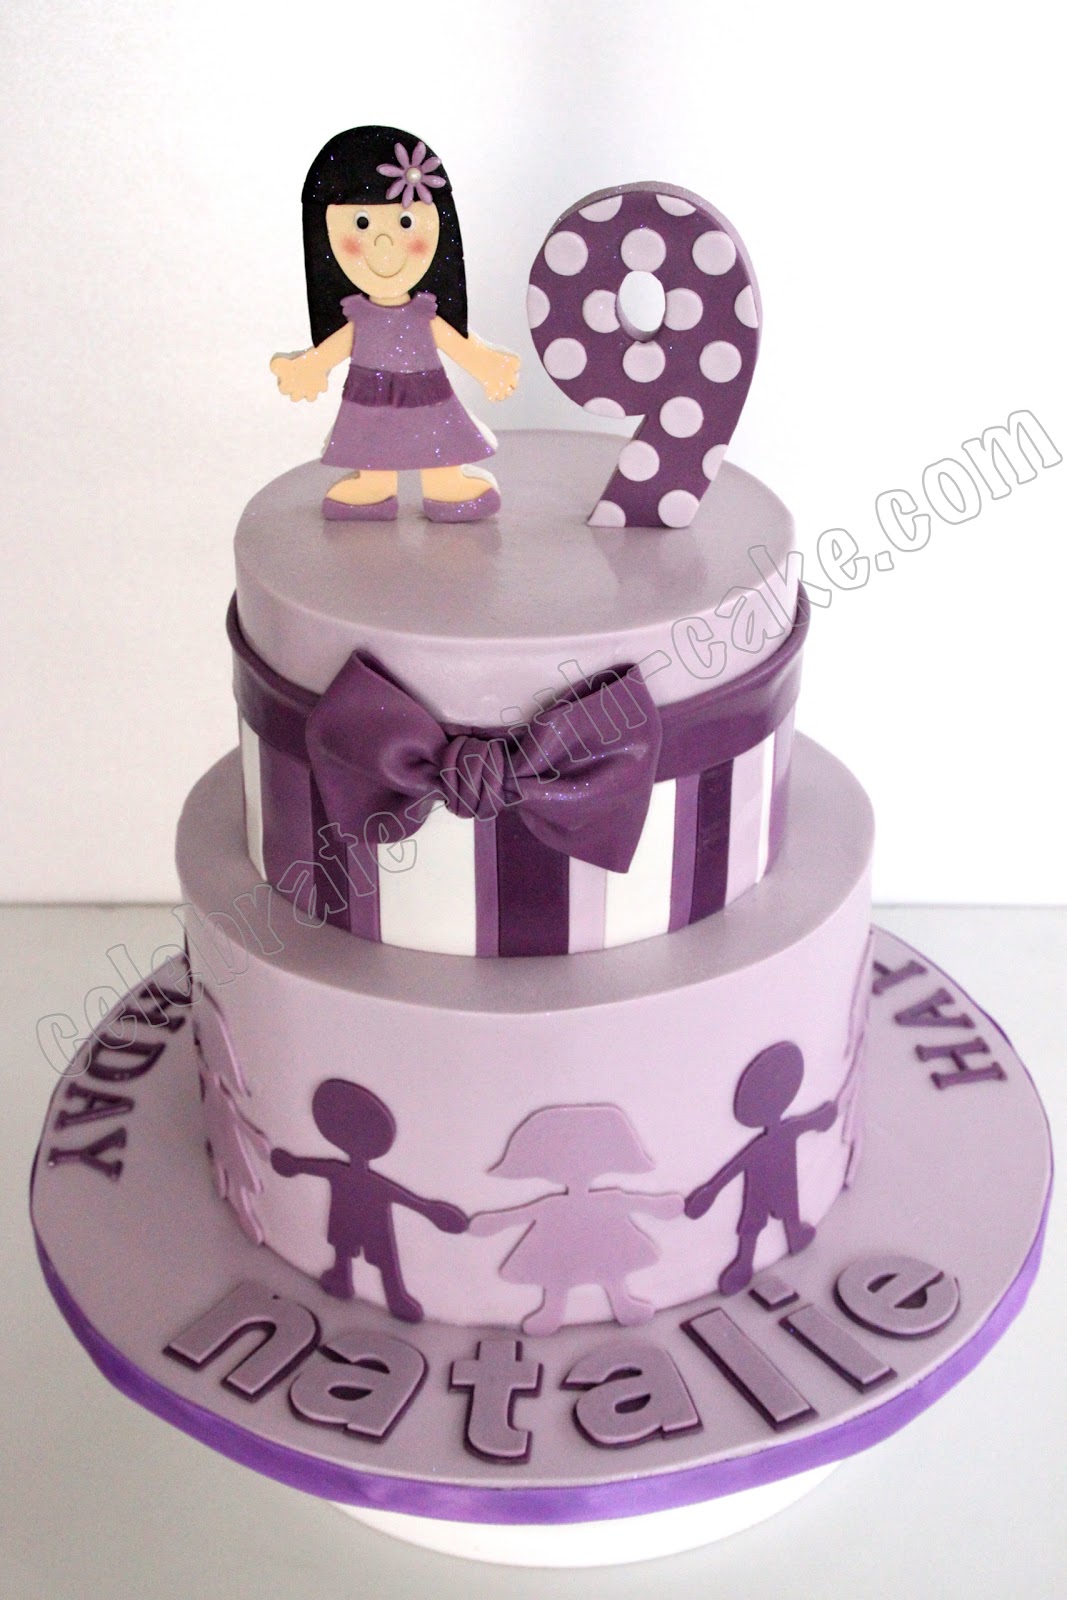 7 Photos of Paper Cut Out Cakes